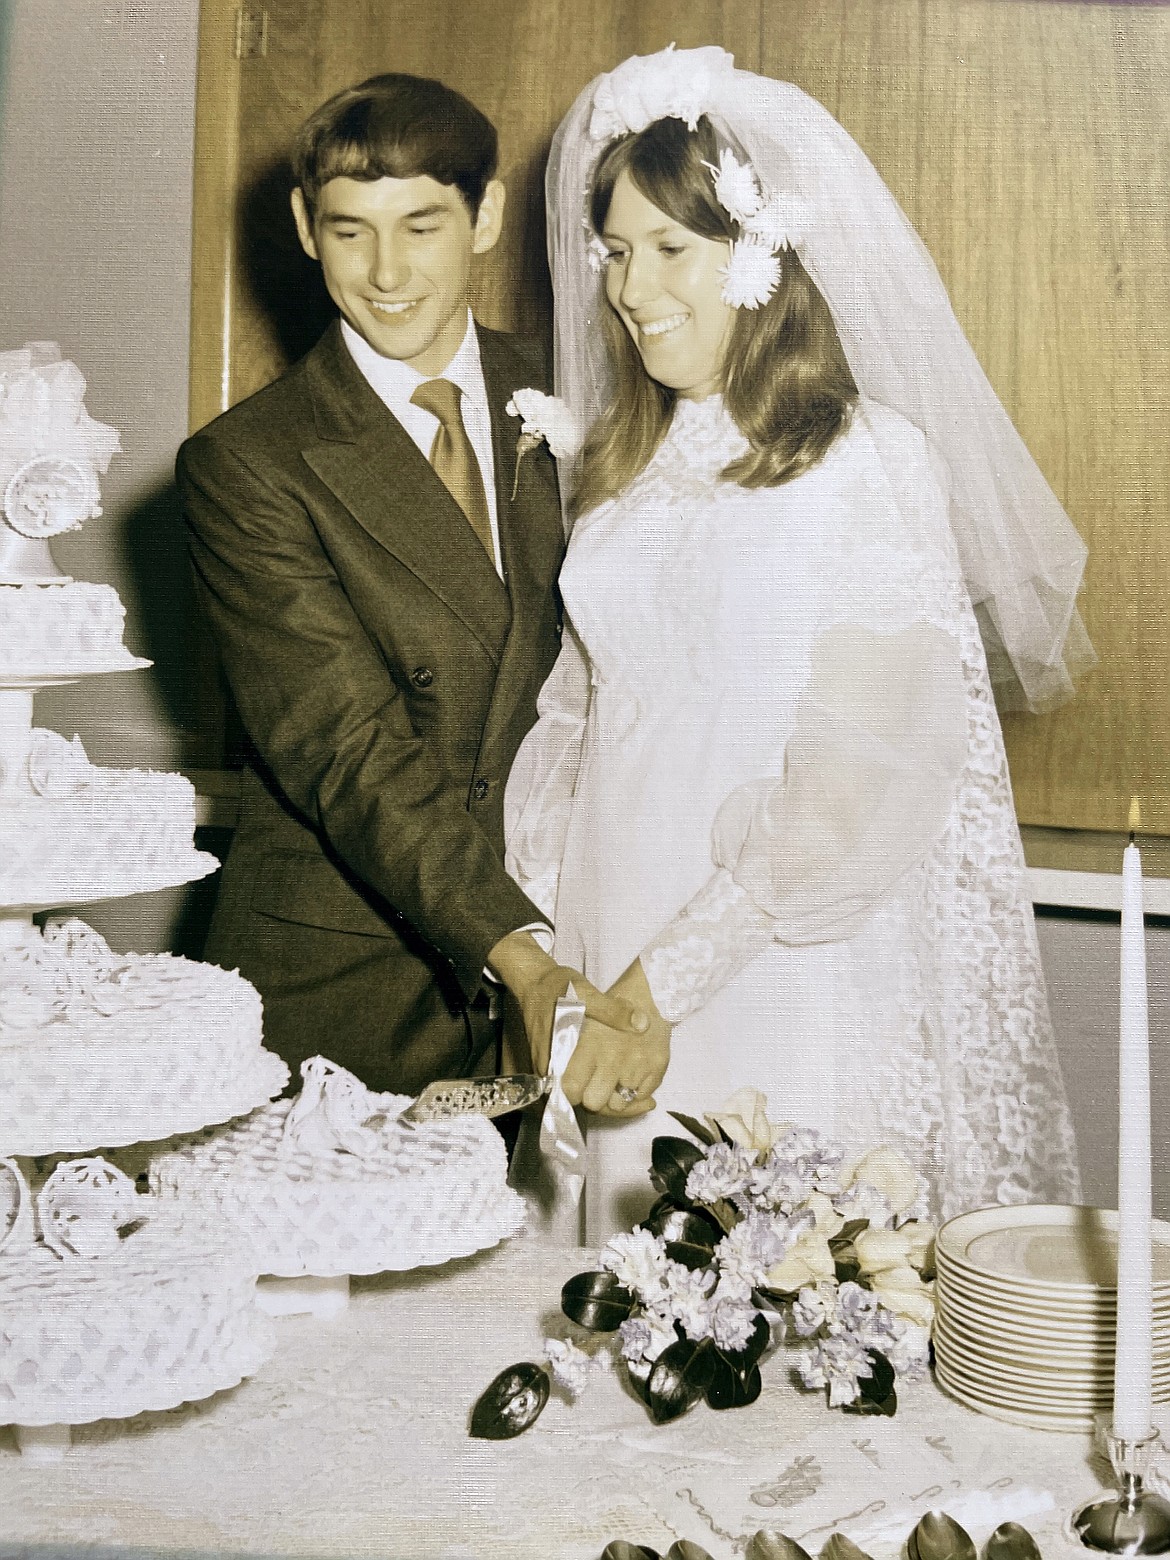 Steve and Louise Wood on their wedding day on June 11, 1971.